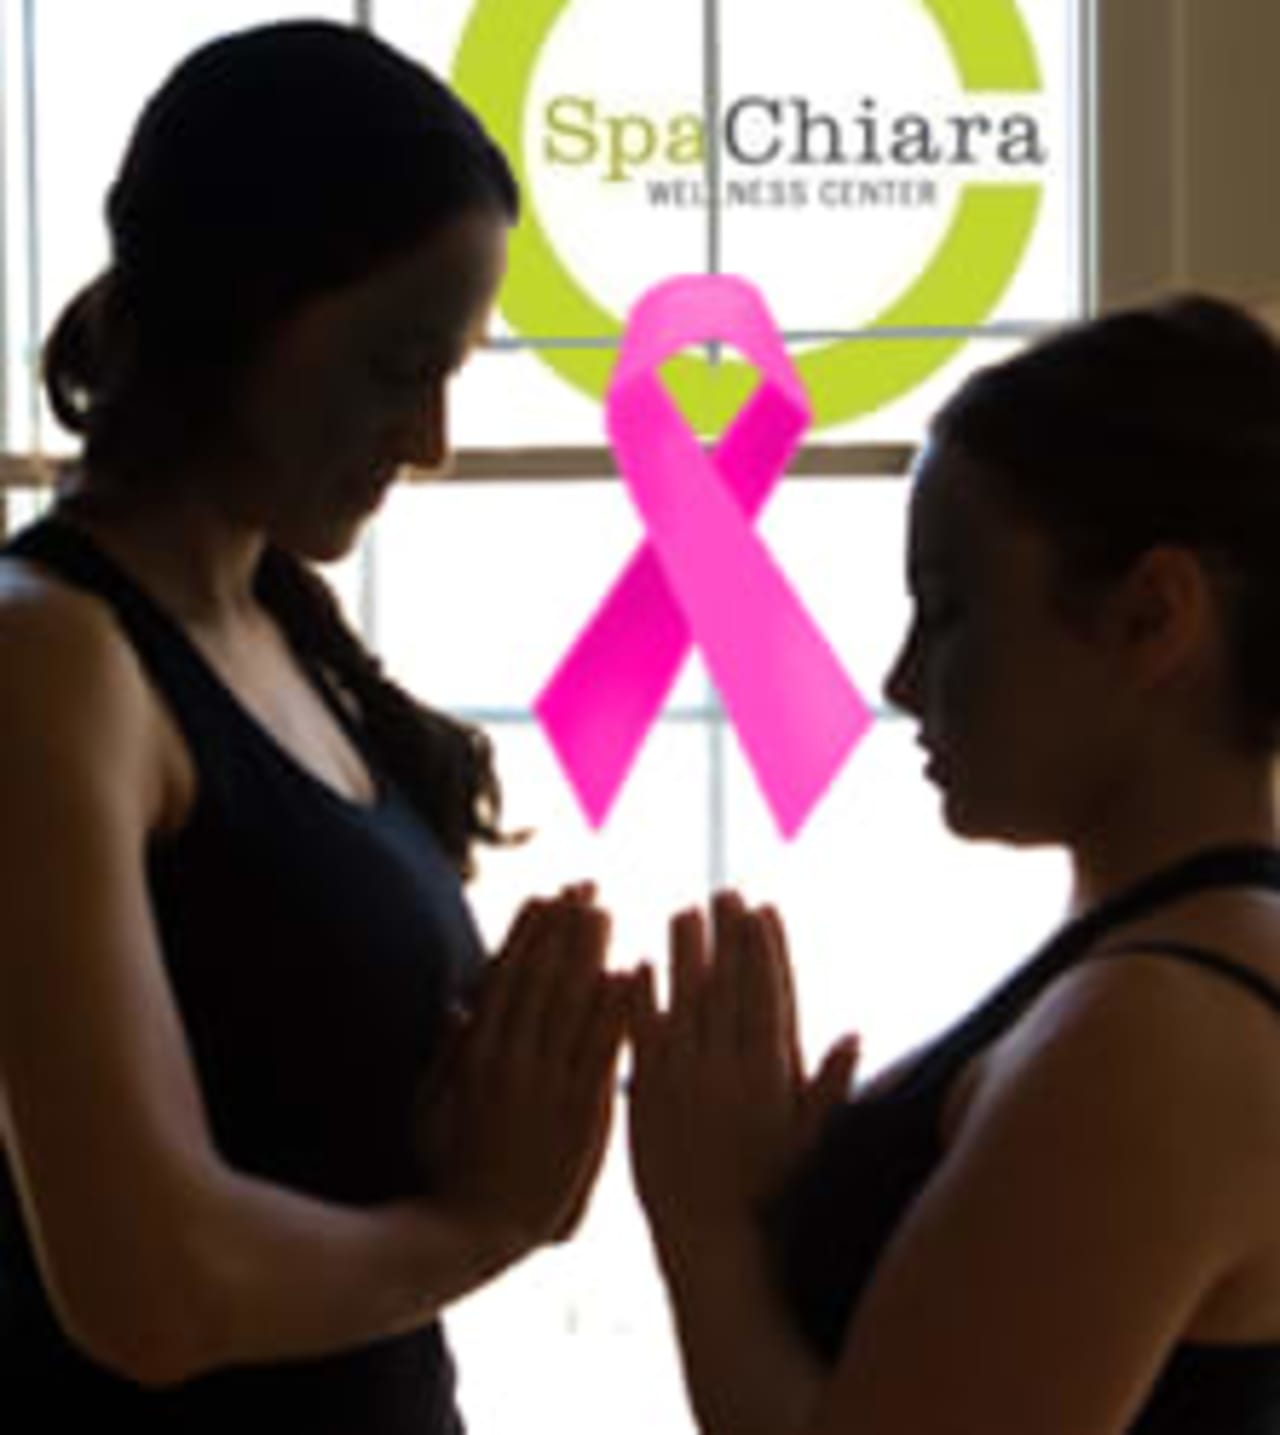 SpaChiara in Mount Kisco is hosting a special "Meditation in Pink" session for Breast Cancer Awareness Month. 